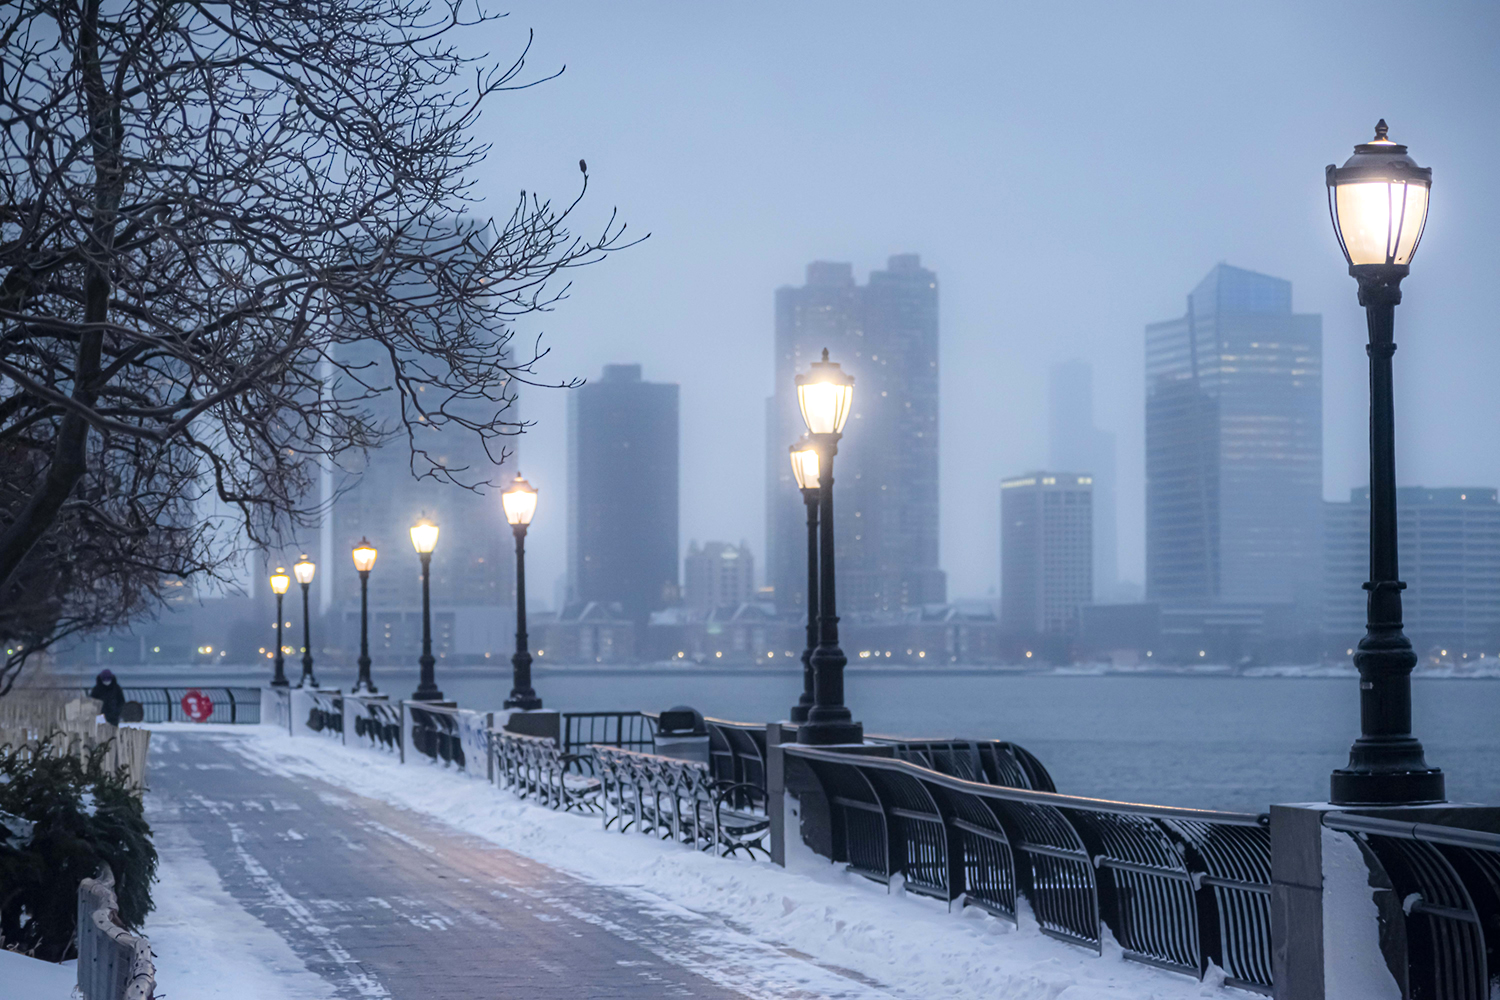 Photograph of street lamps along the Hudson River in New York City during the winter.